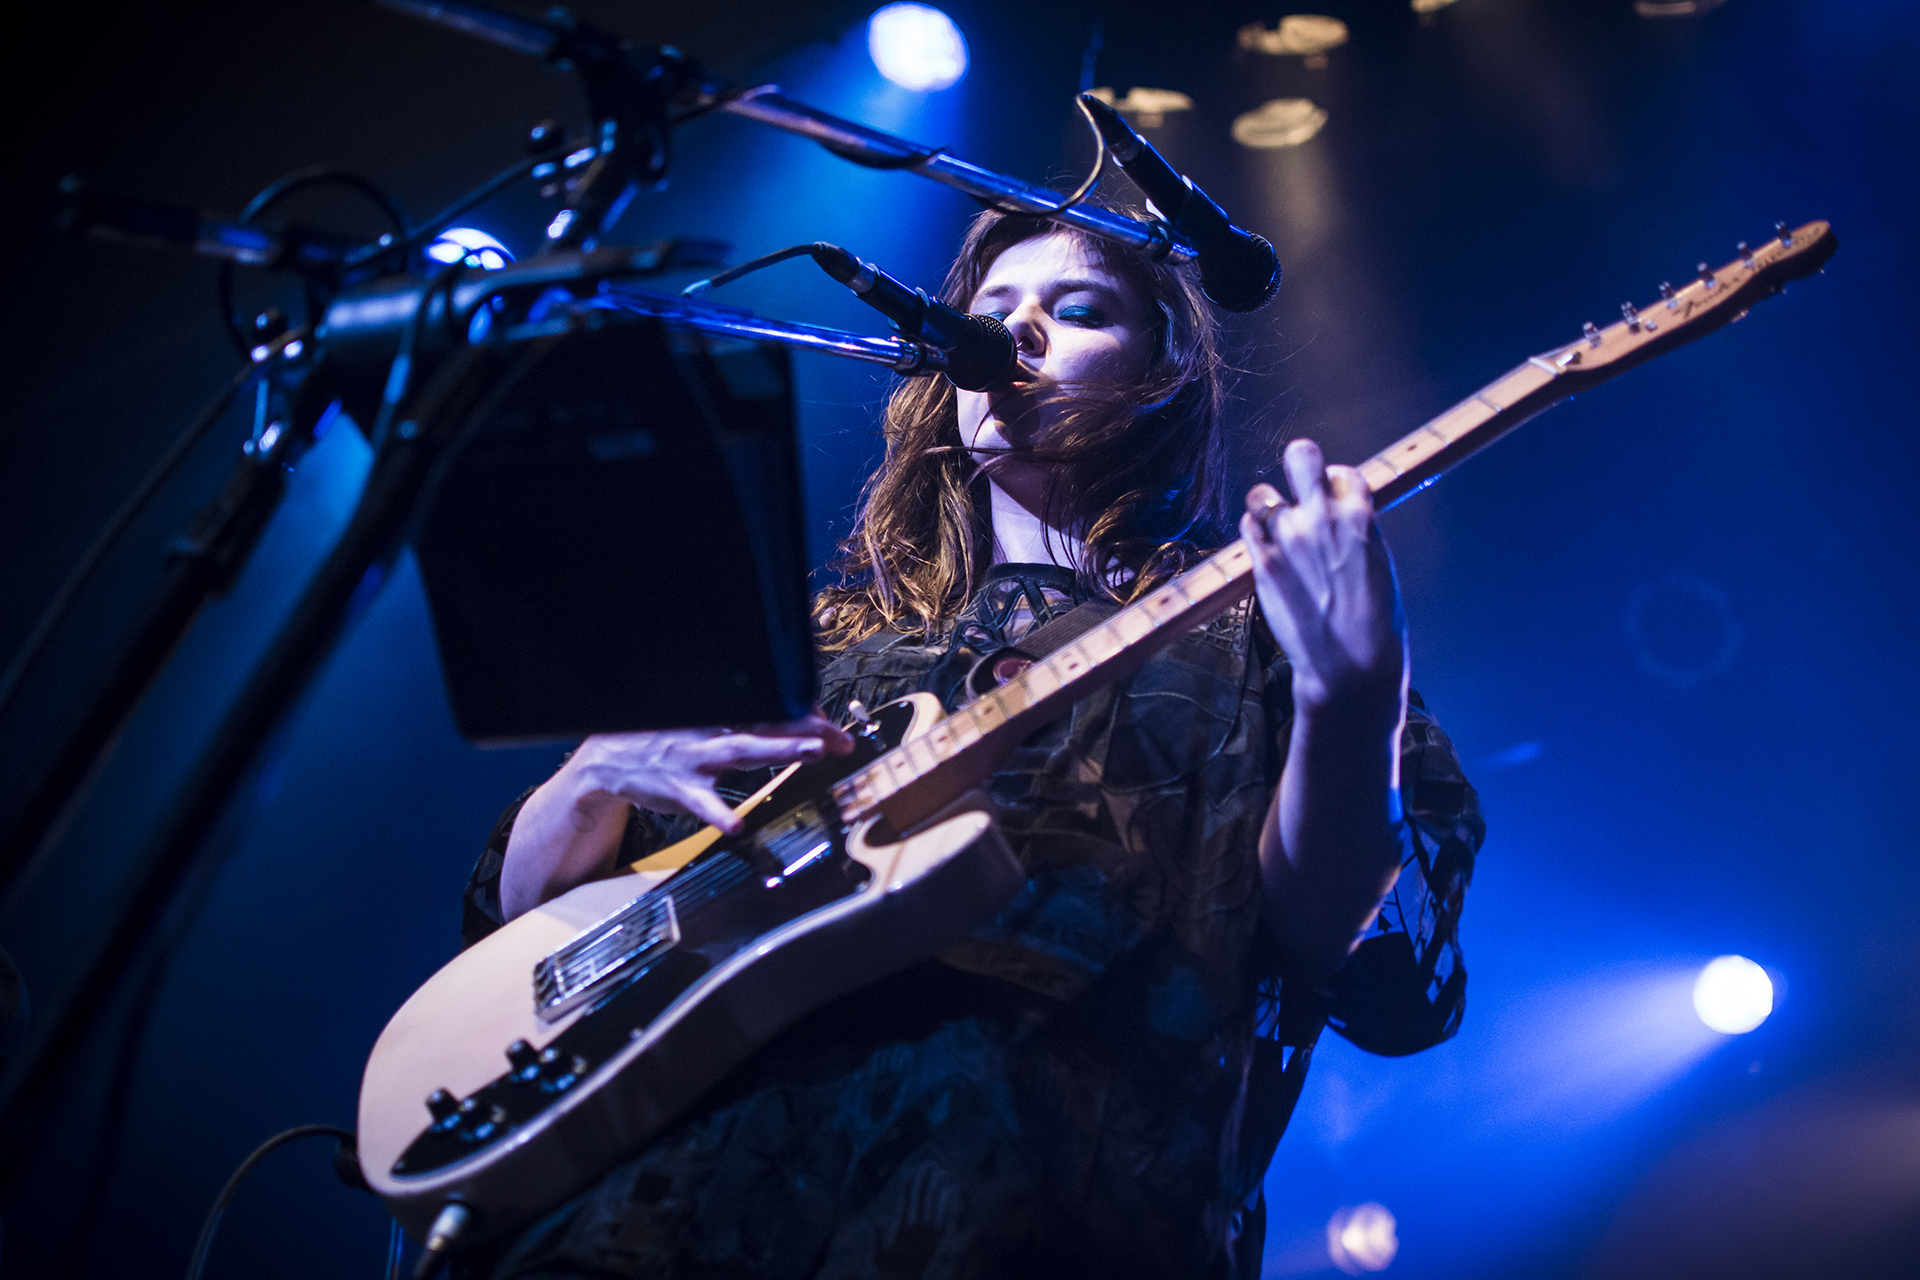 Of-Monsters-And-Men-Niceto-Club-16-Marzo-2016-Lucia-de-la-Torre-Indie-Hoy-5